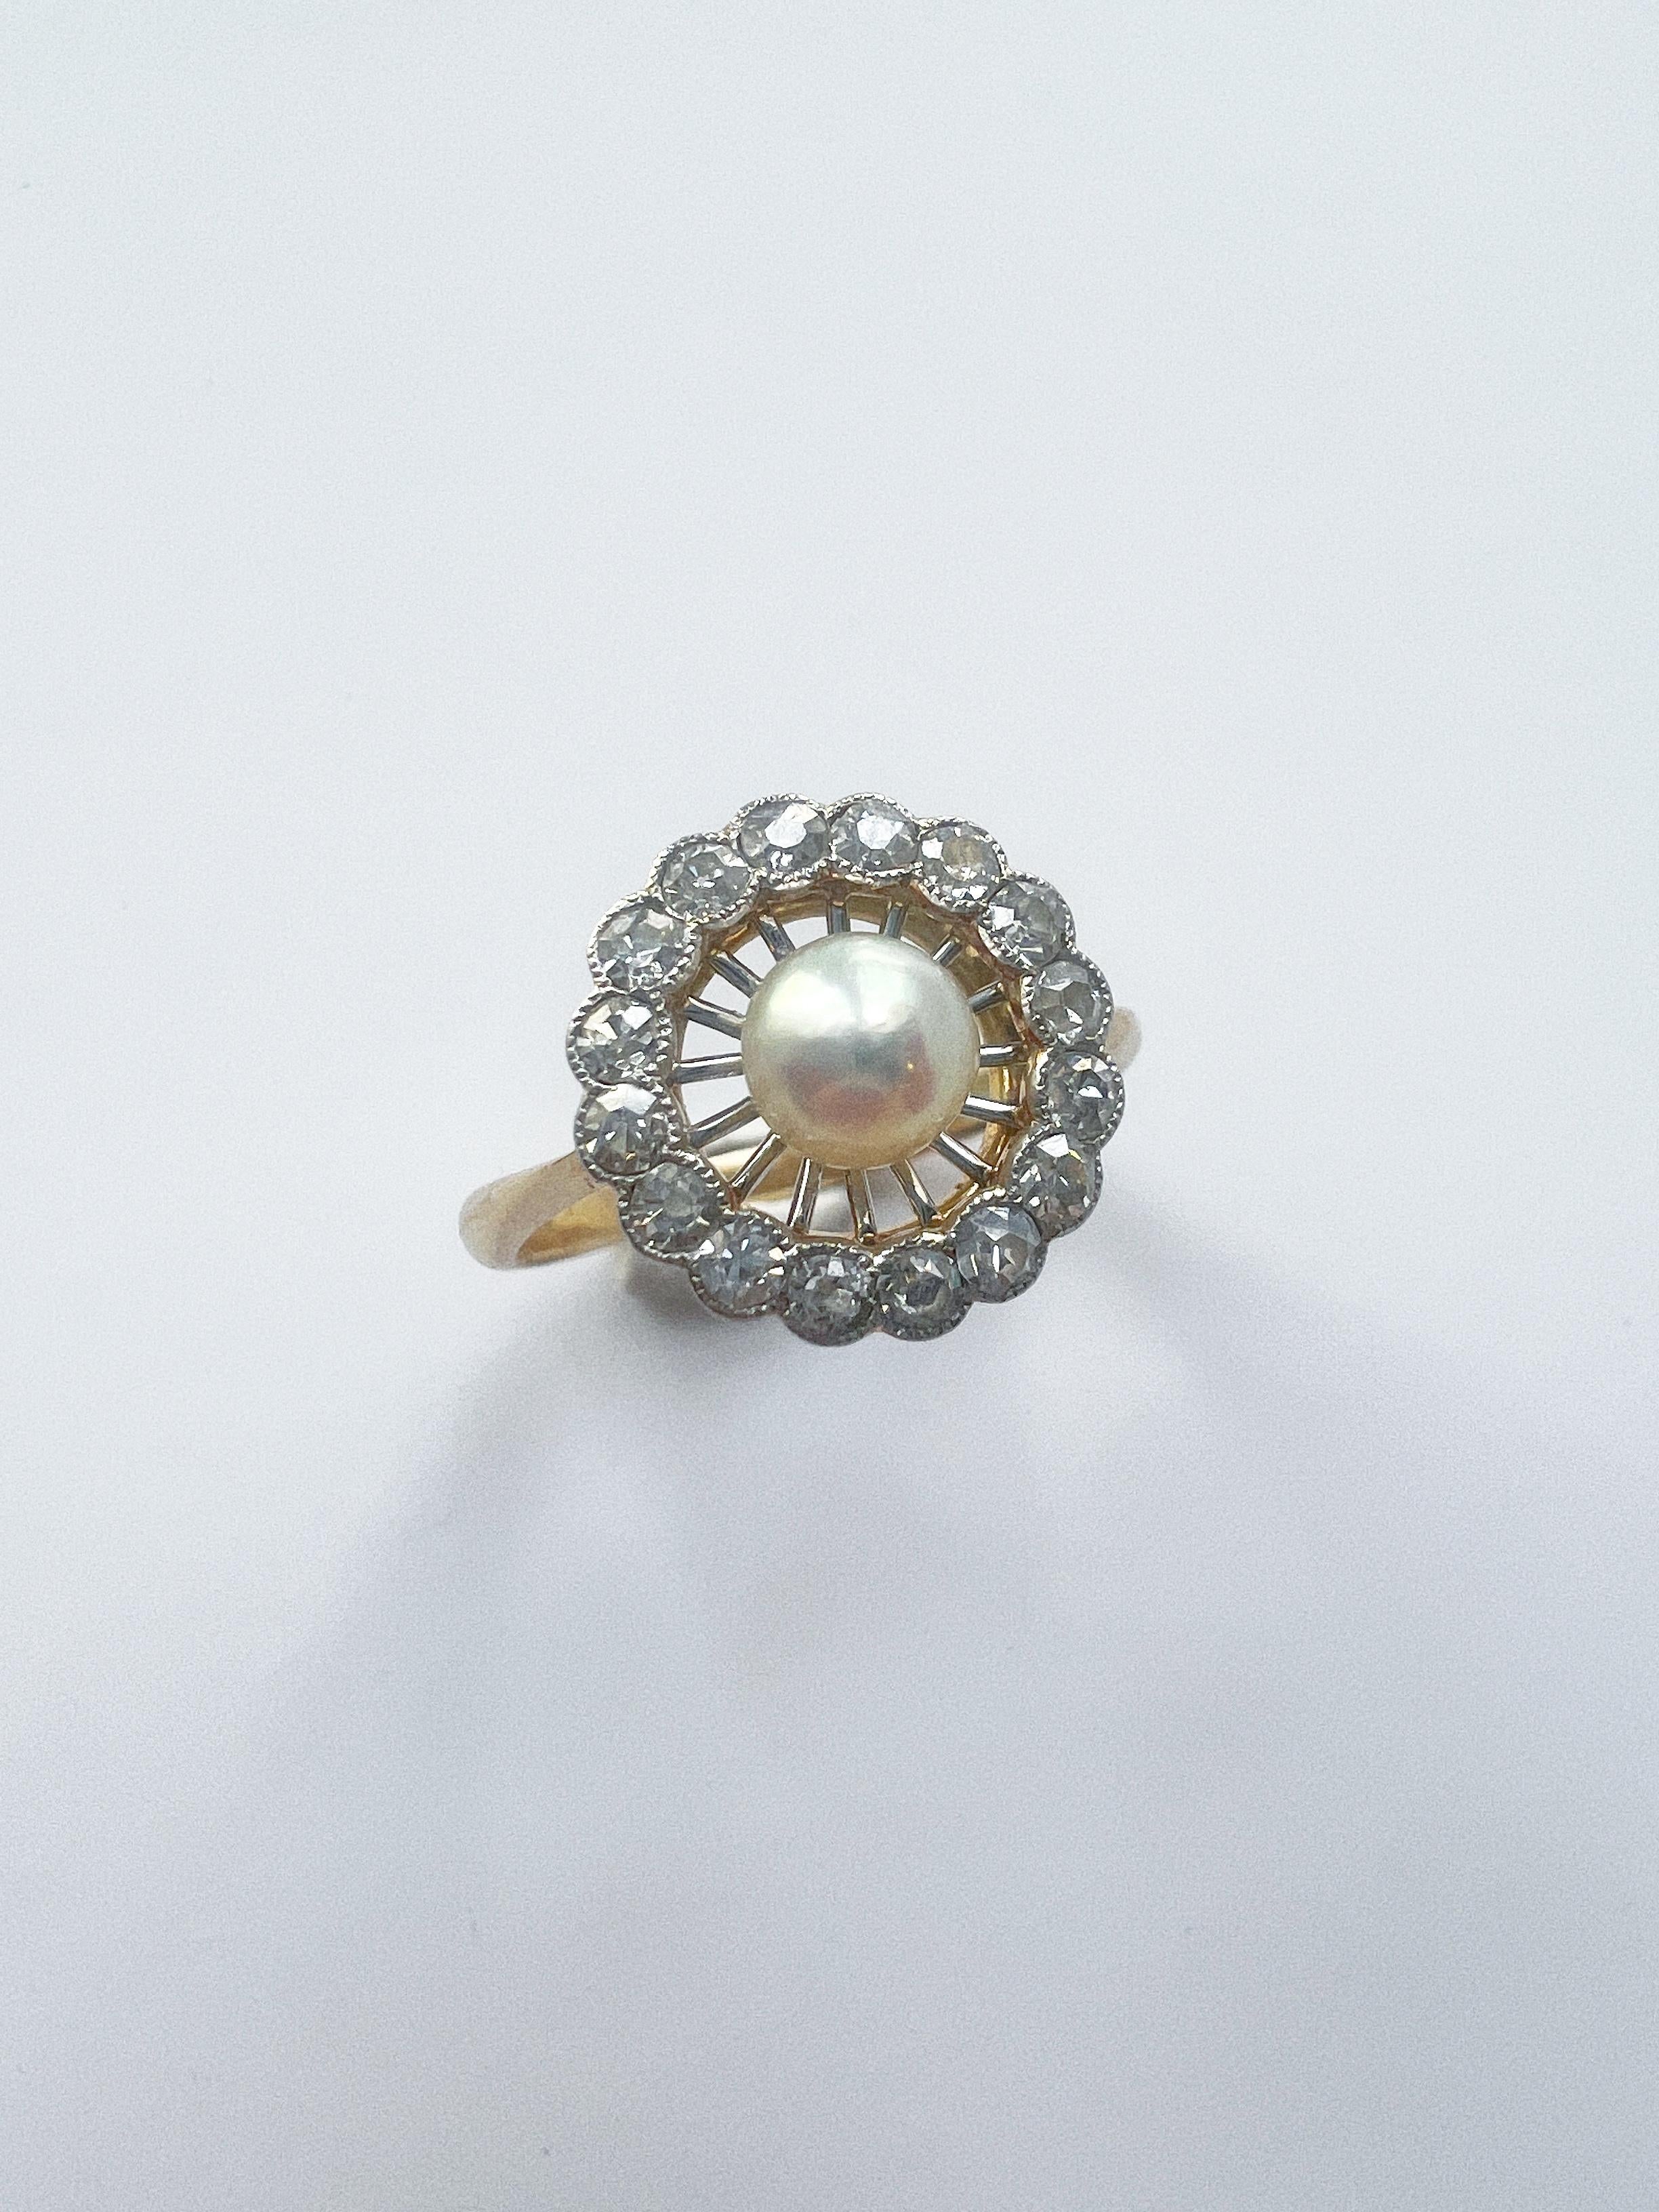 The Edwardian era jewelry were characterized by a lightness and delicacy which had their roots in 18th century jewelry and goldsmith.

For sale a perfect example of the ring from that period. The ring features a delicate lattice design with a frame